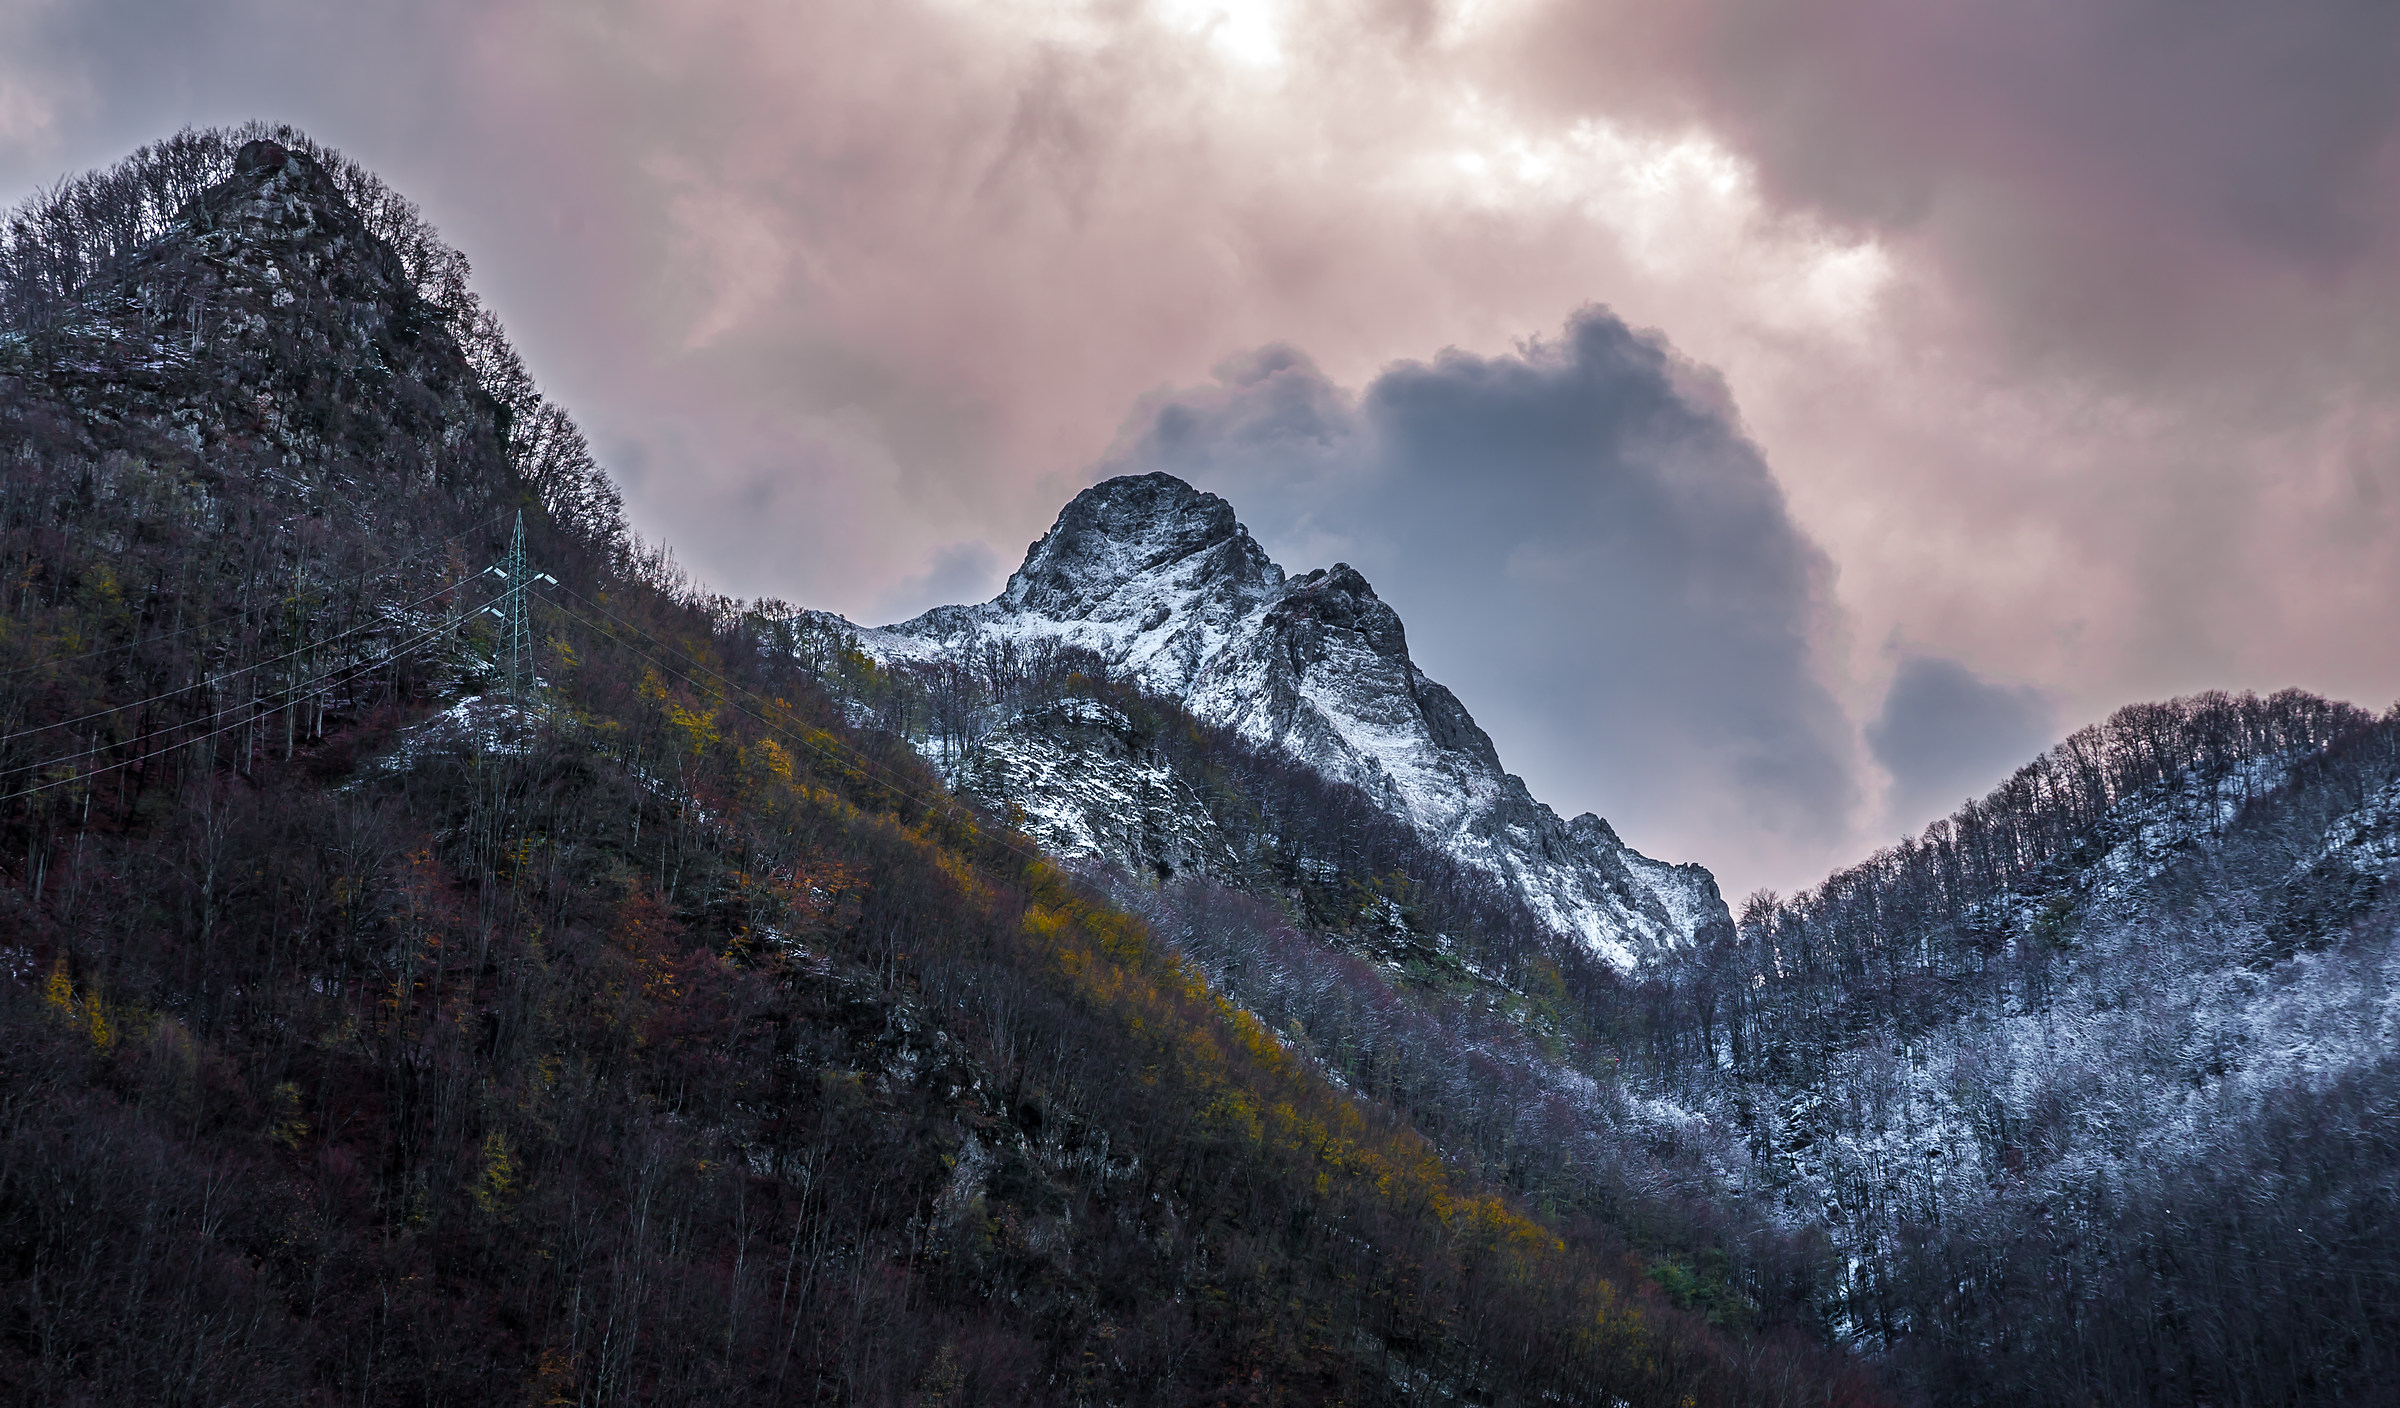 Snow in the Apuan Alps...